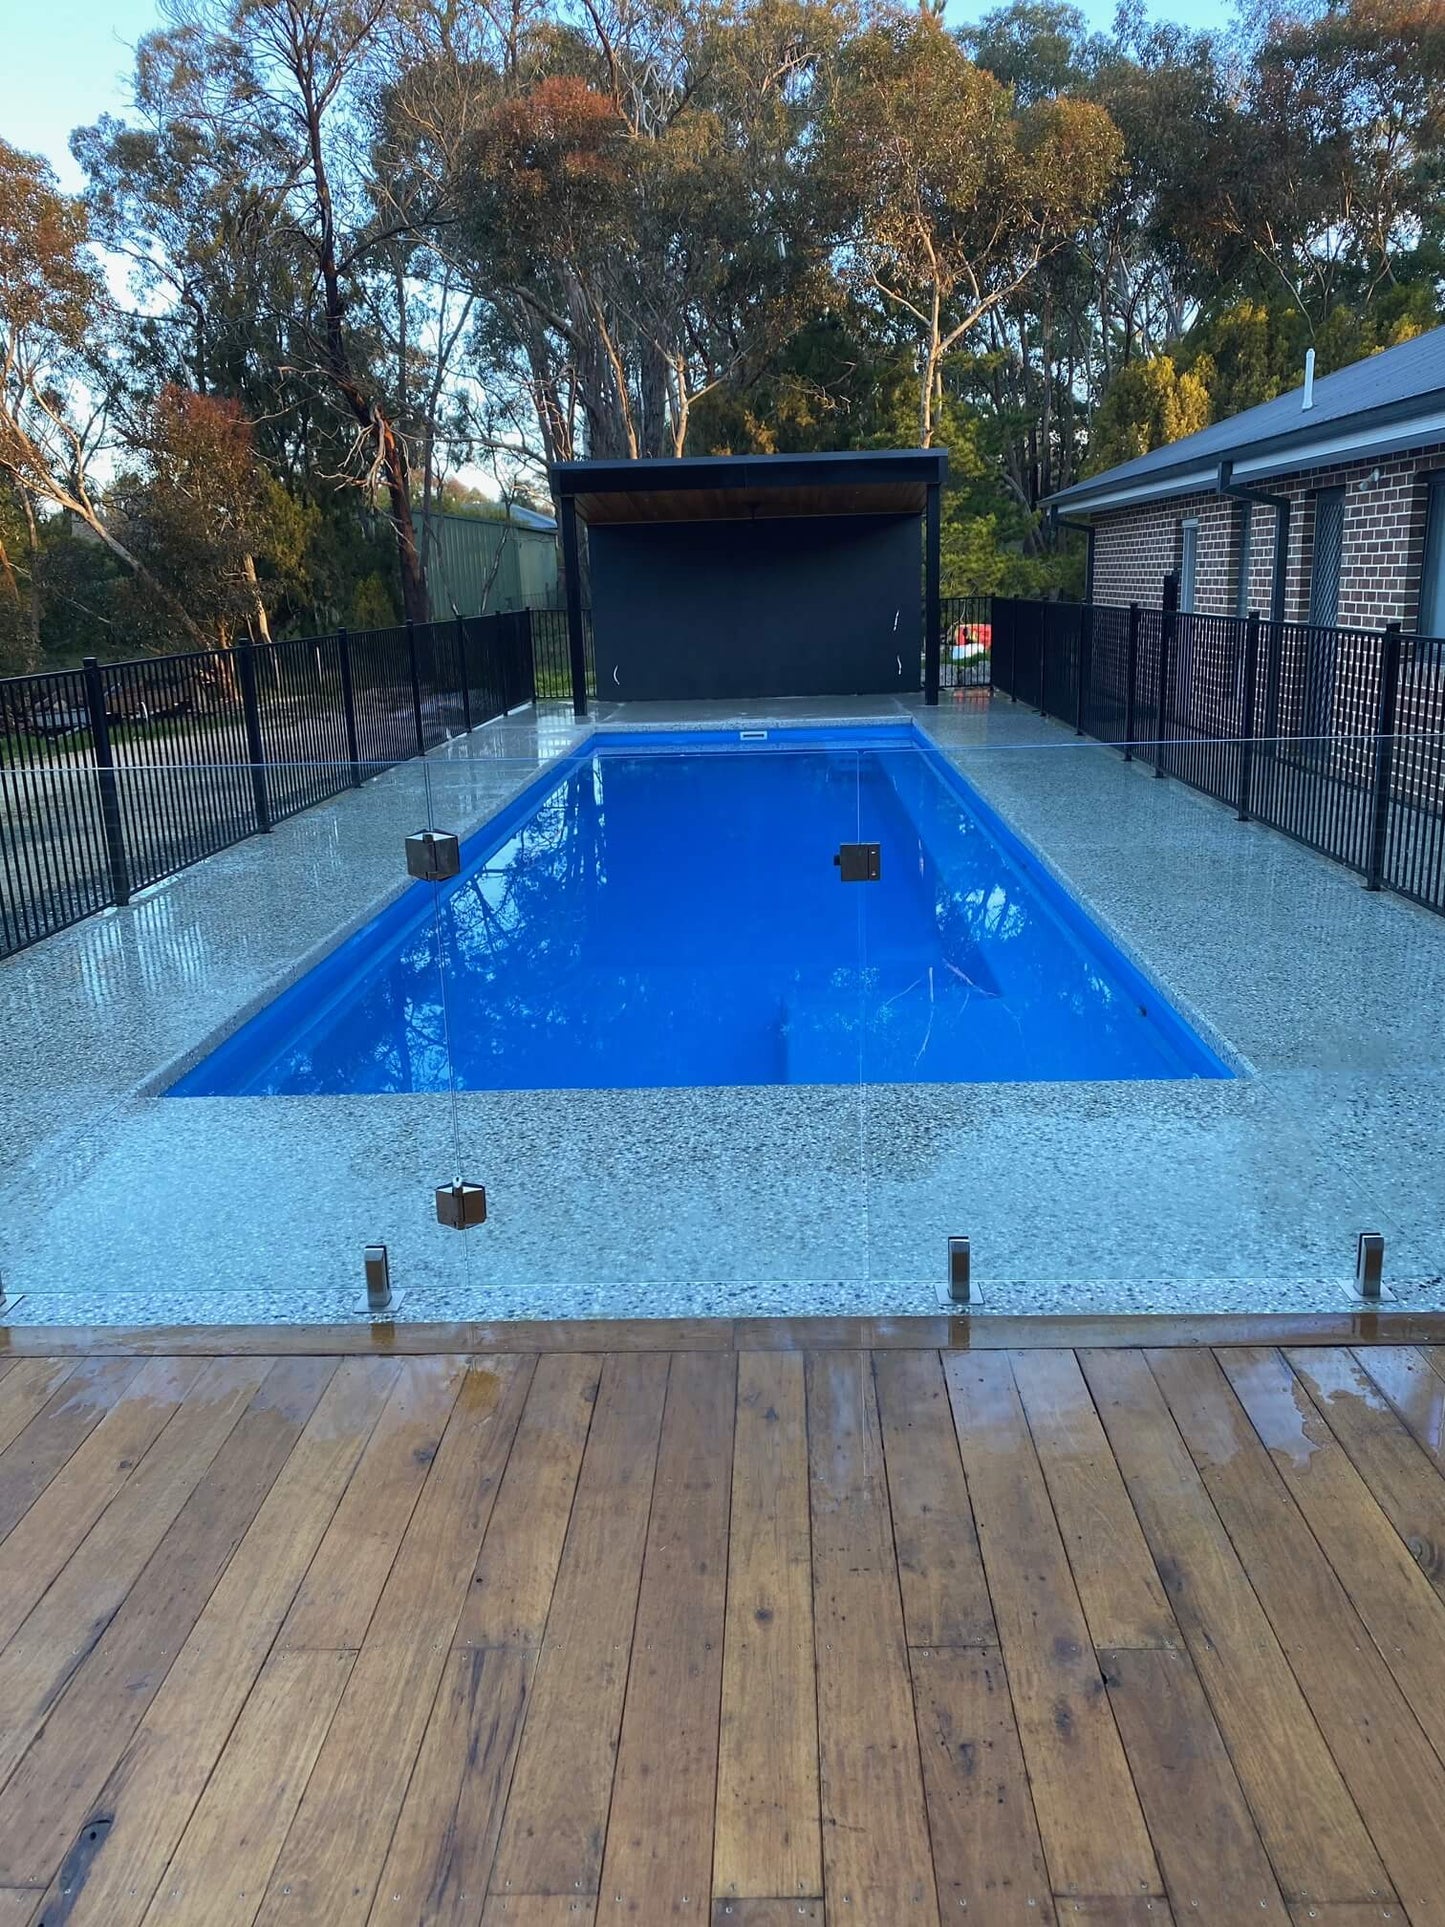 Eden swimming pool range from Conquest Pools Albury Wodonga your local premier swimming pool builder. Be sure to contact Conquest Pools Albury Wodonga your true one stop swimming pool company offering swimming pool installation, blankets, heating, chemicals, umbrellas, servicing and maintenance.  